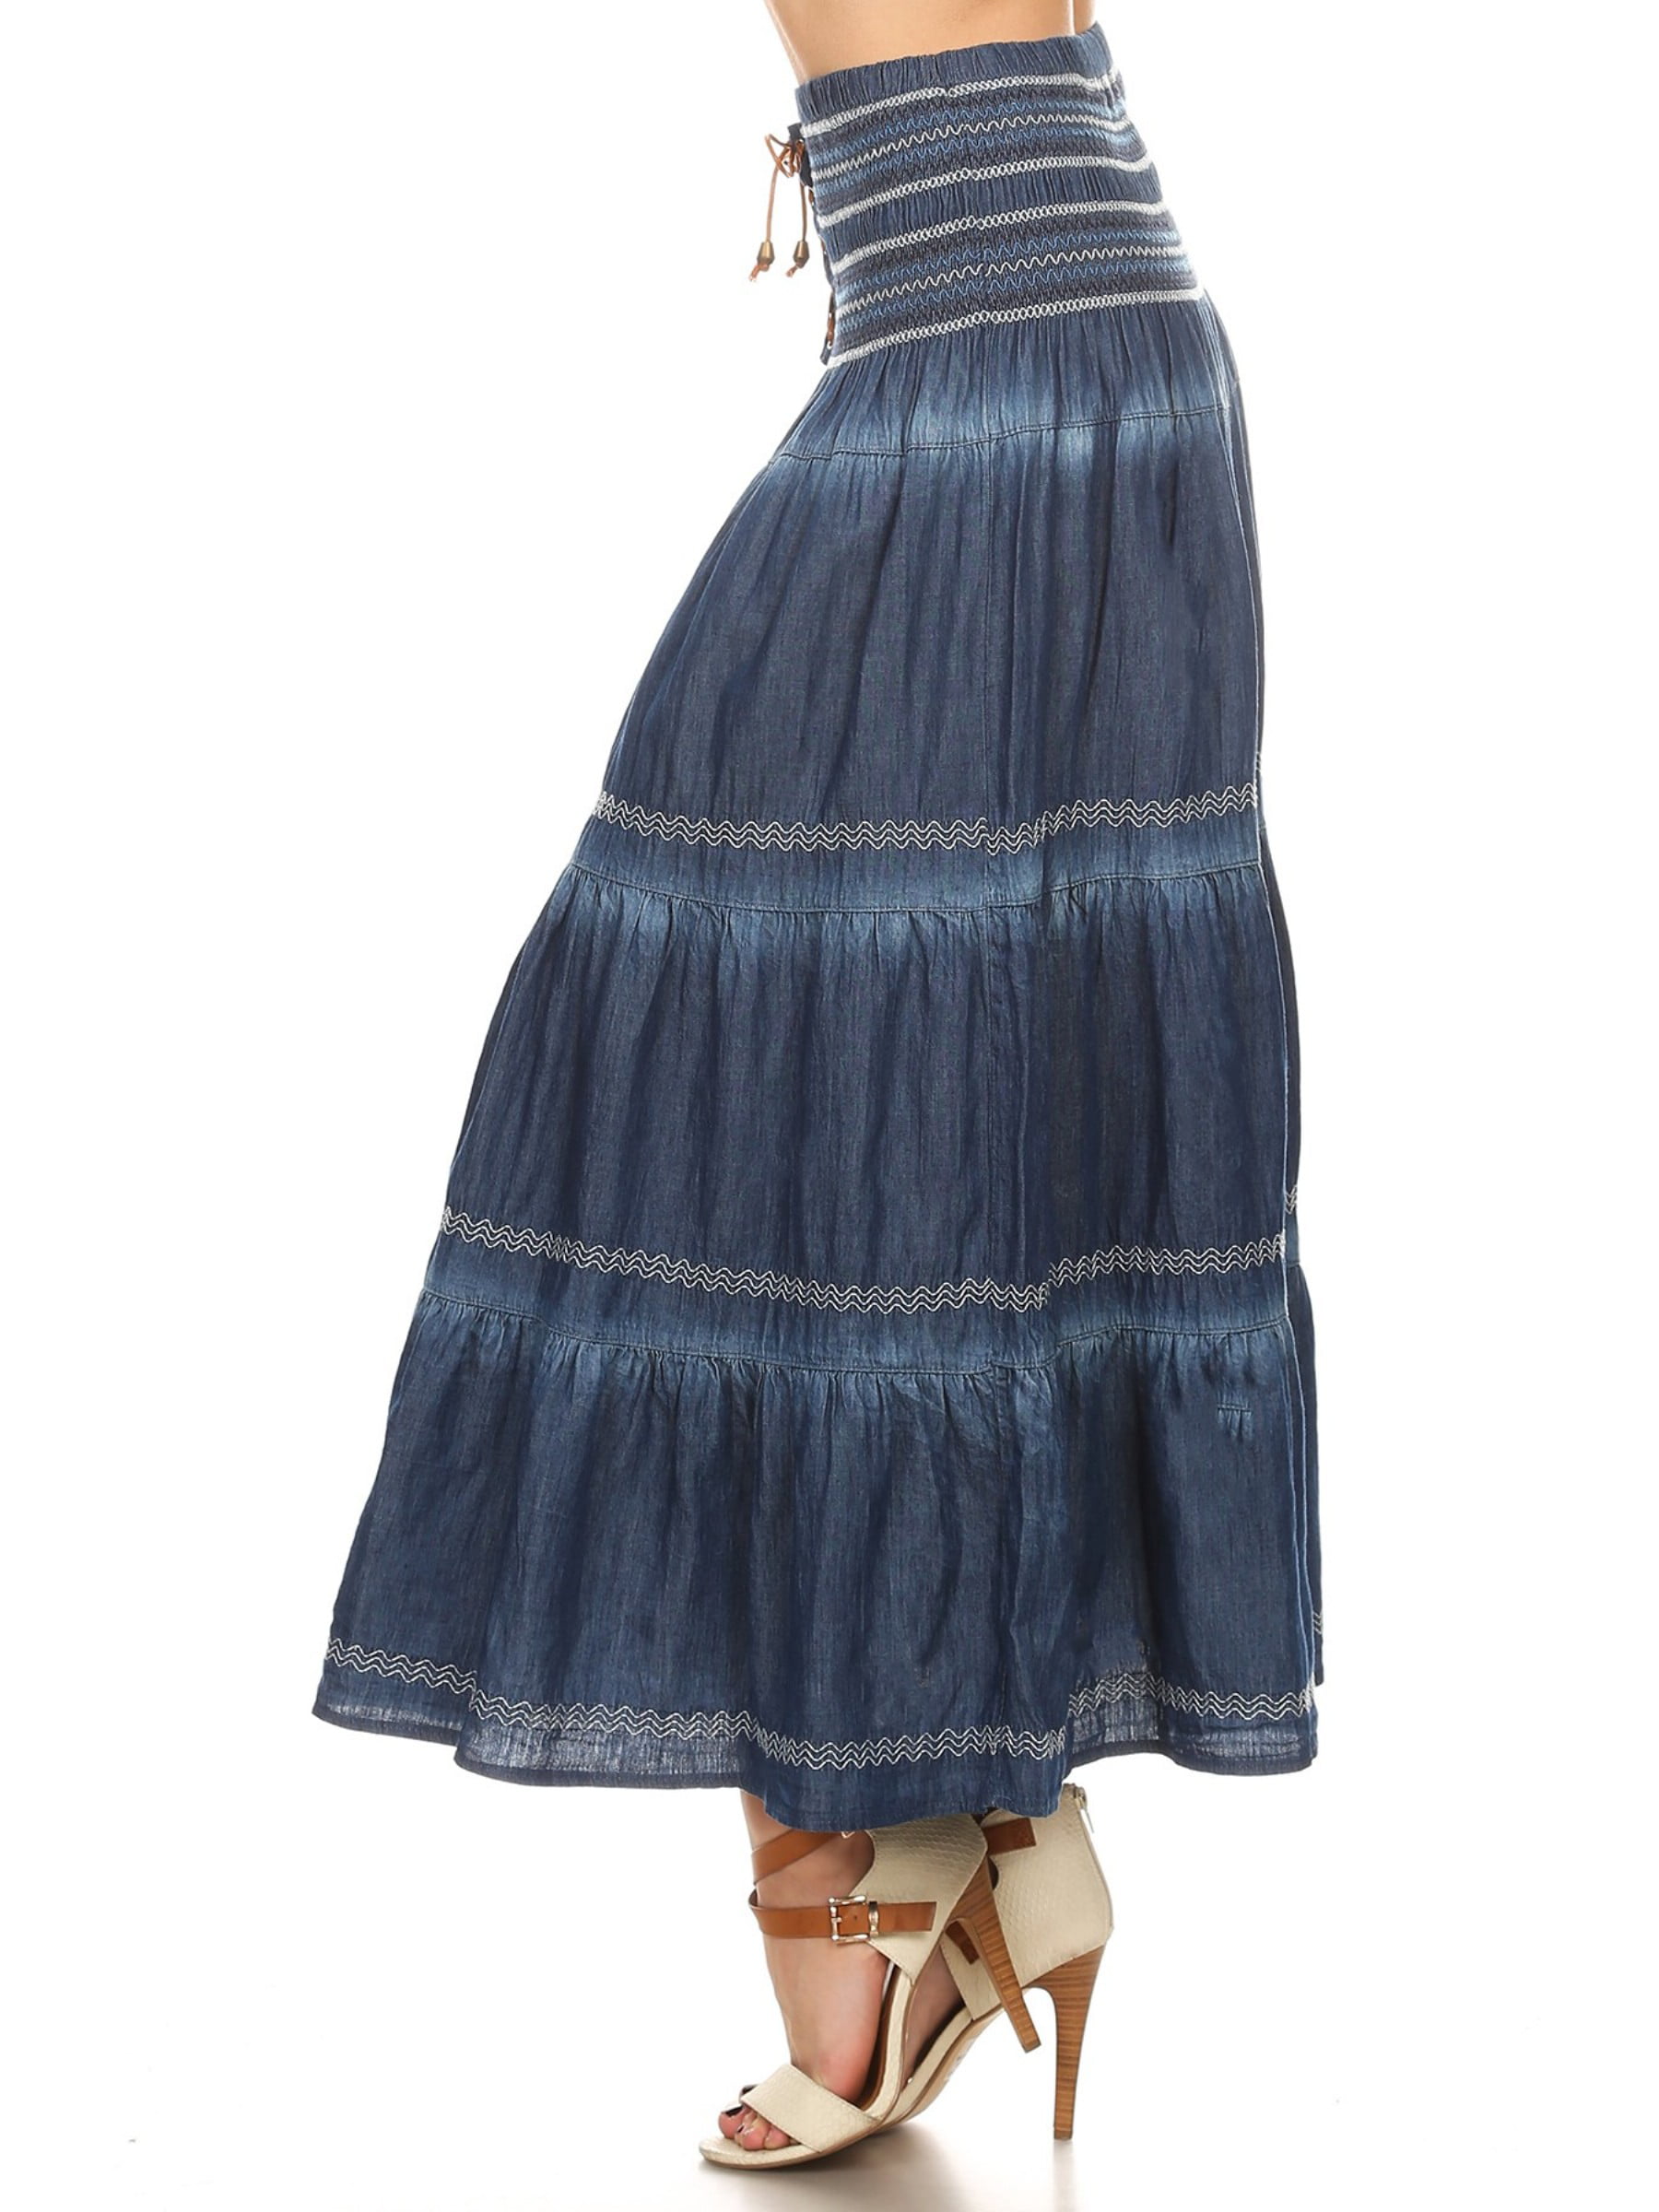 Fit and Flare Tiered Layers Denim Skirt or Midi Dress with Corset like